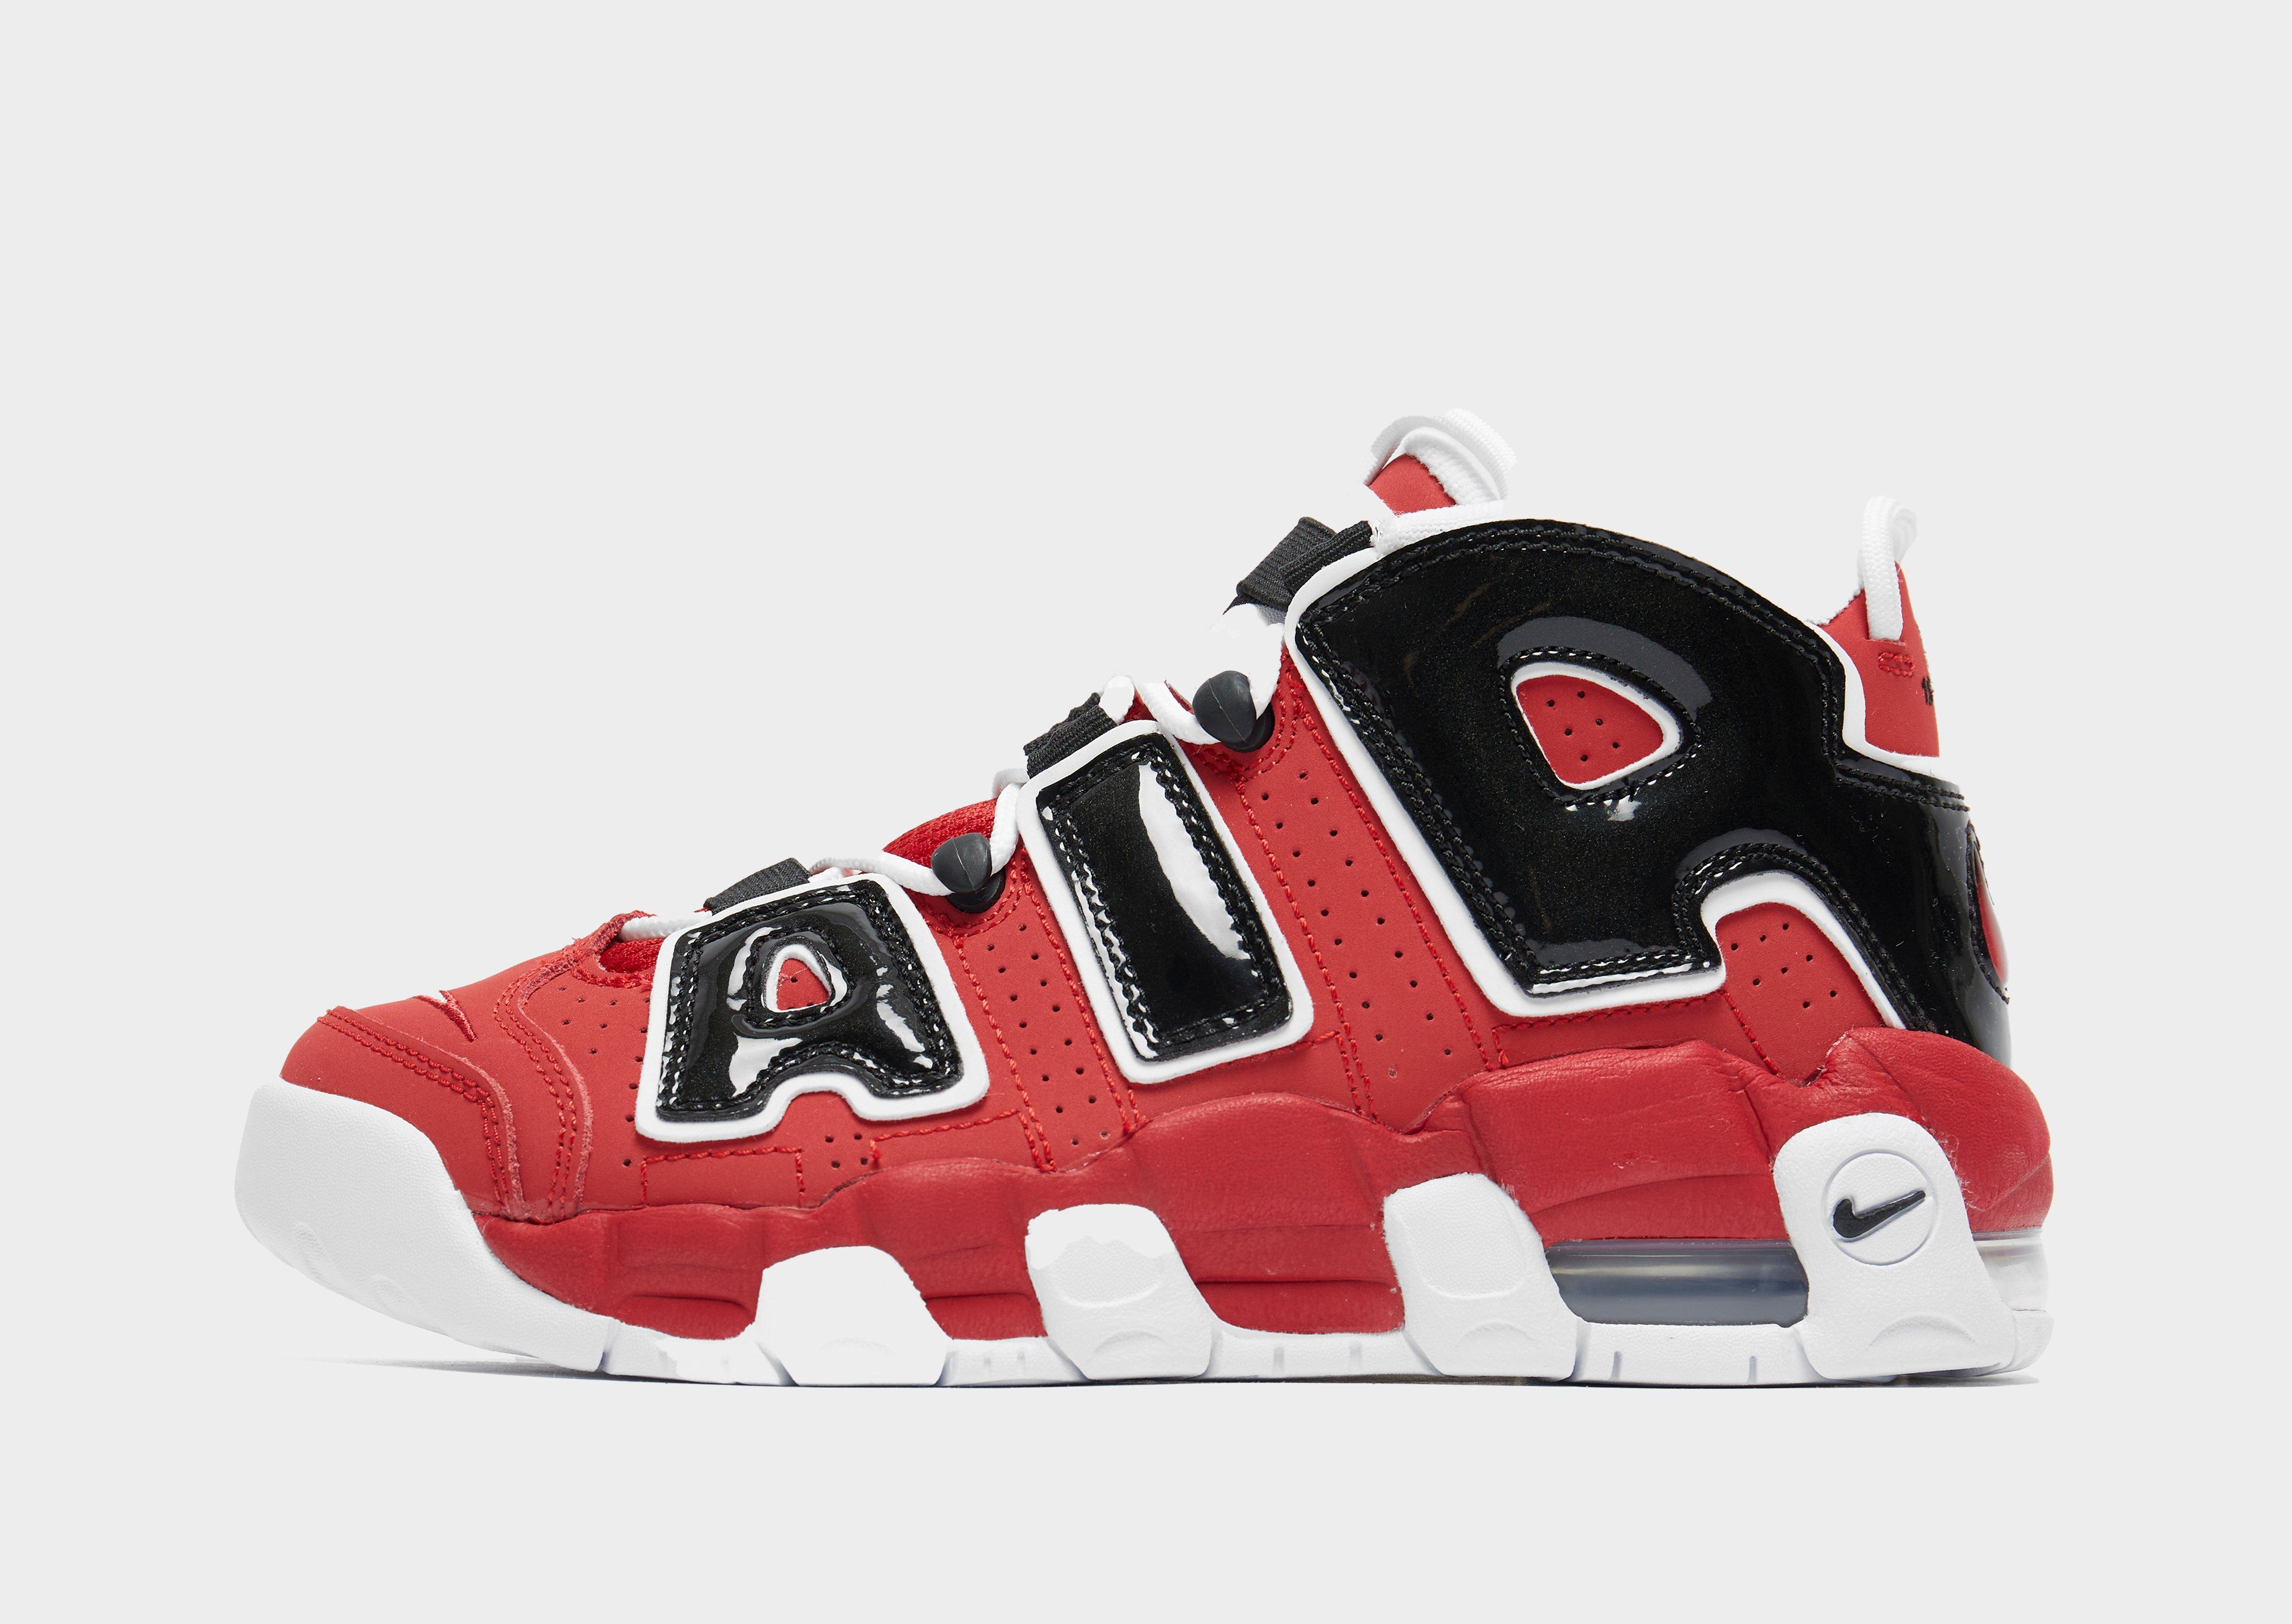 jd nike air more uptempo